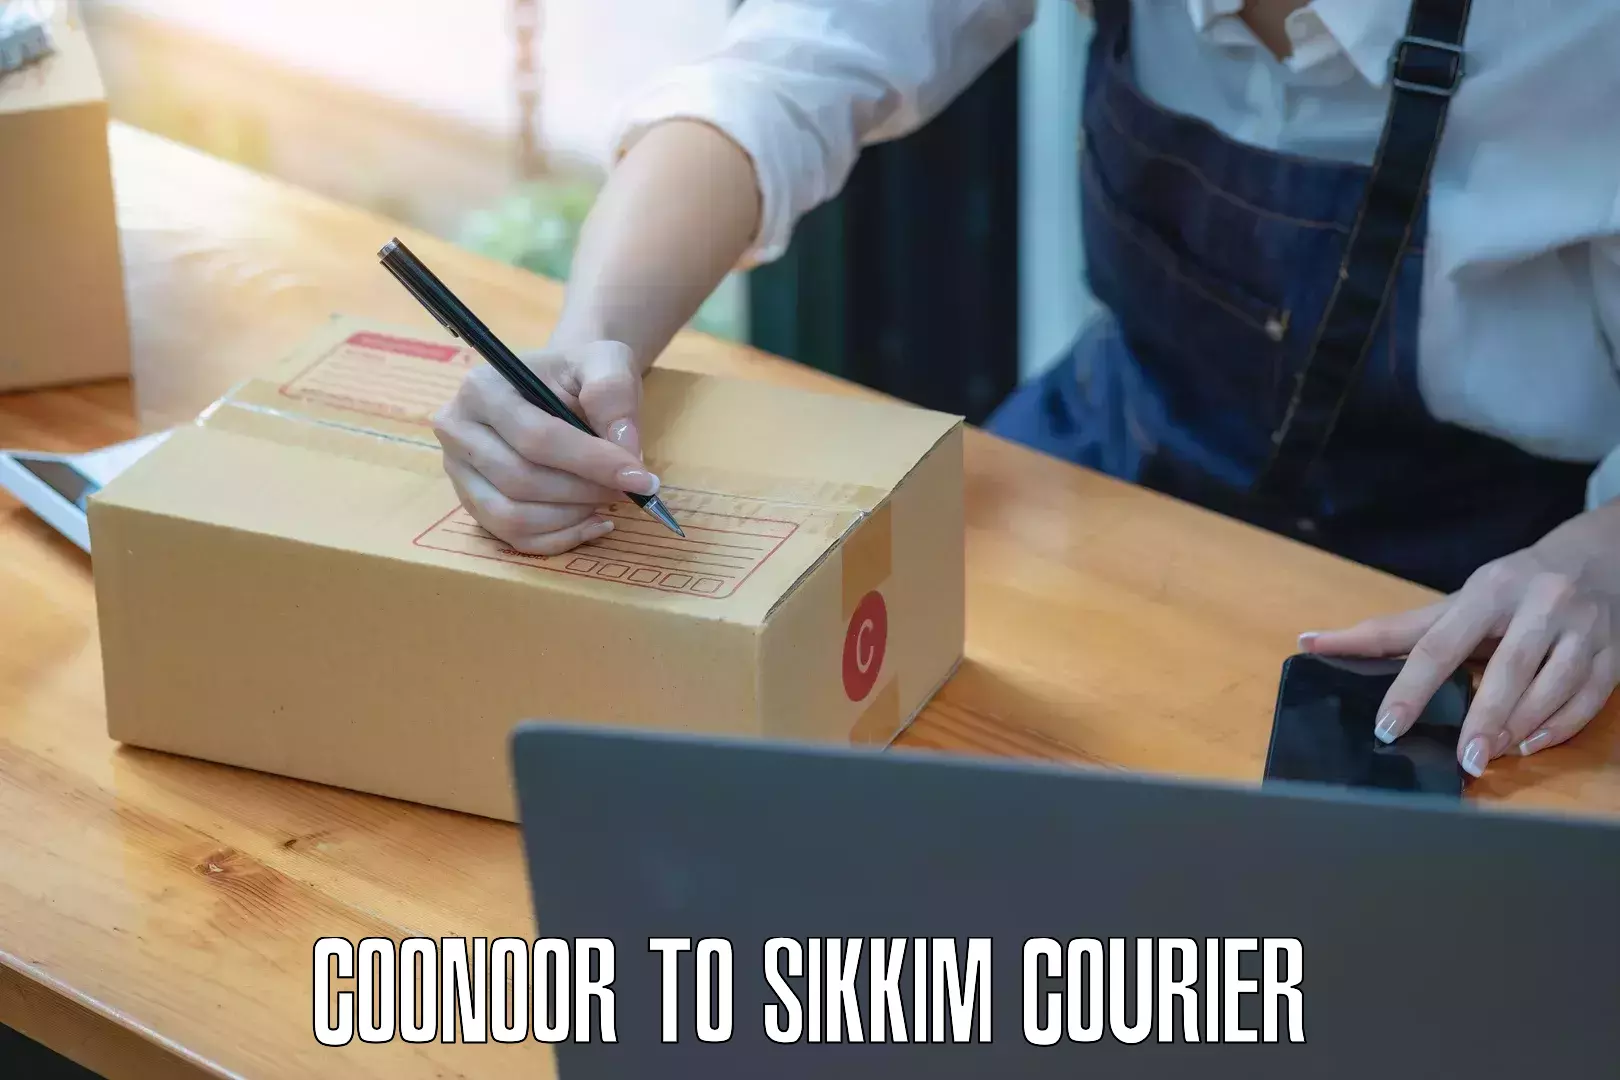 Business shipping needs Coonoor to Sikkim